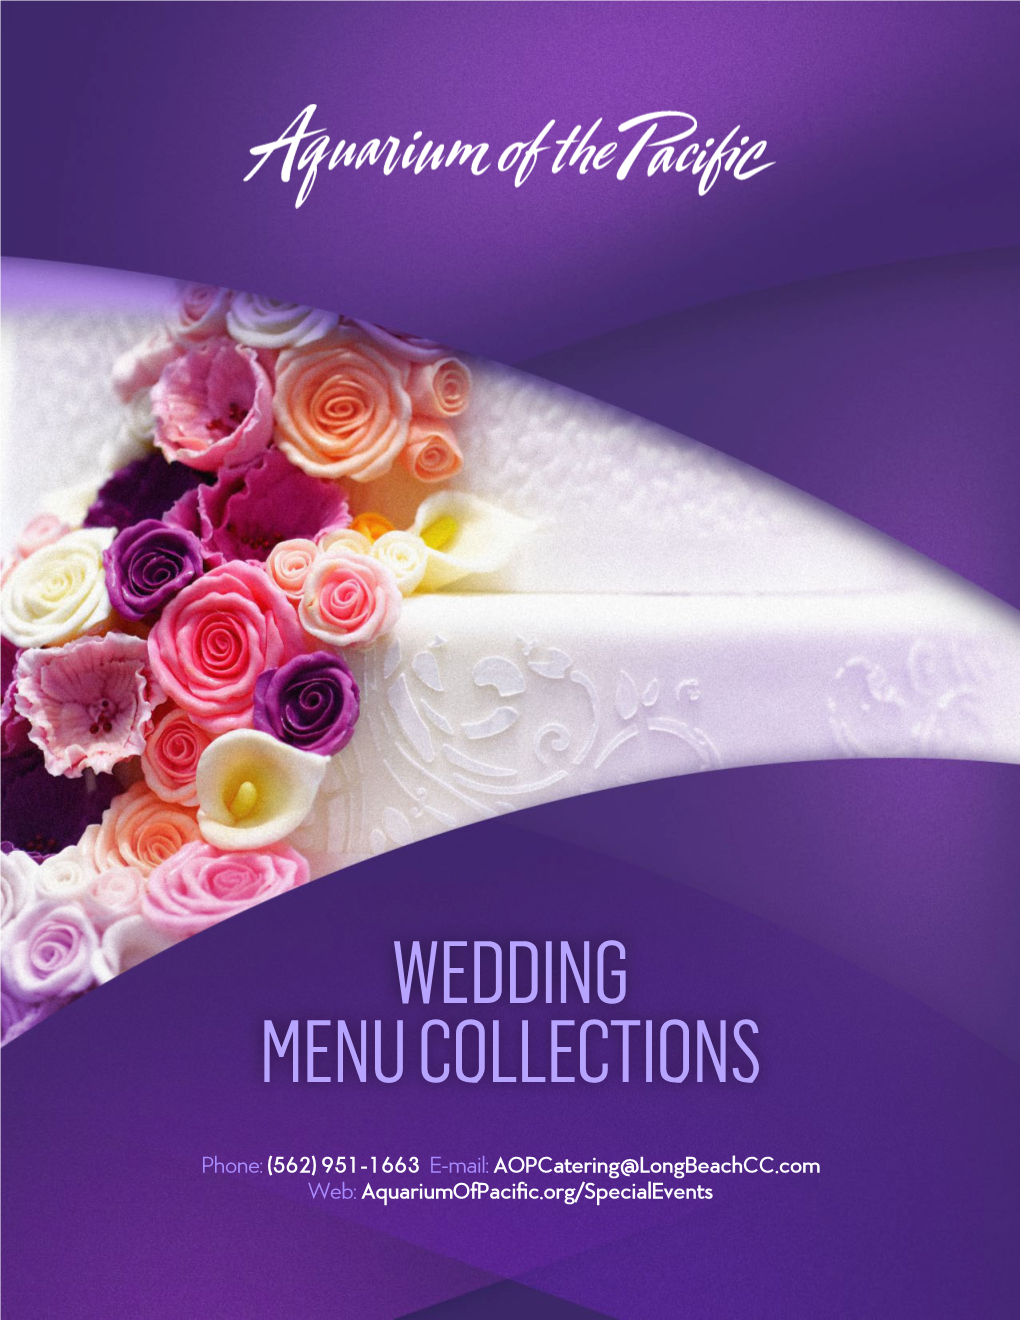 Wedding Events Menu Collections